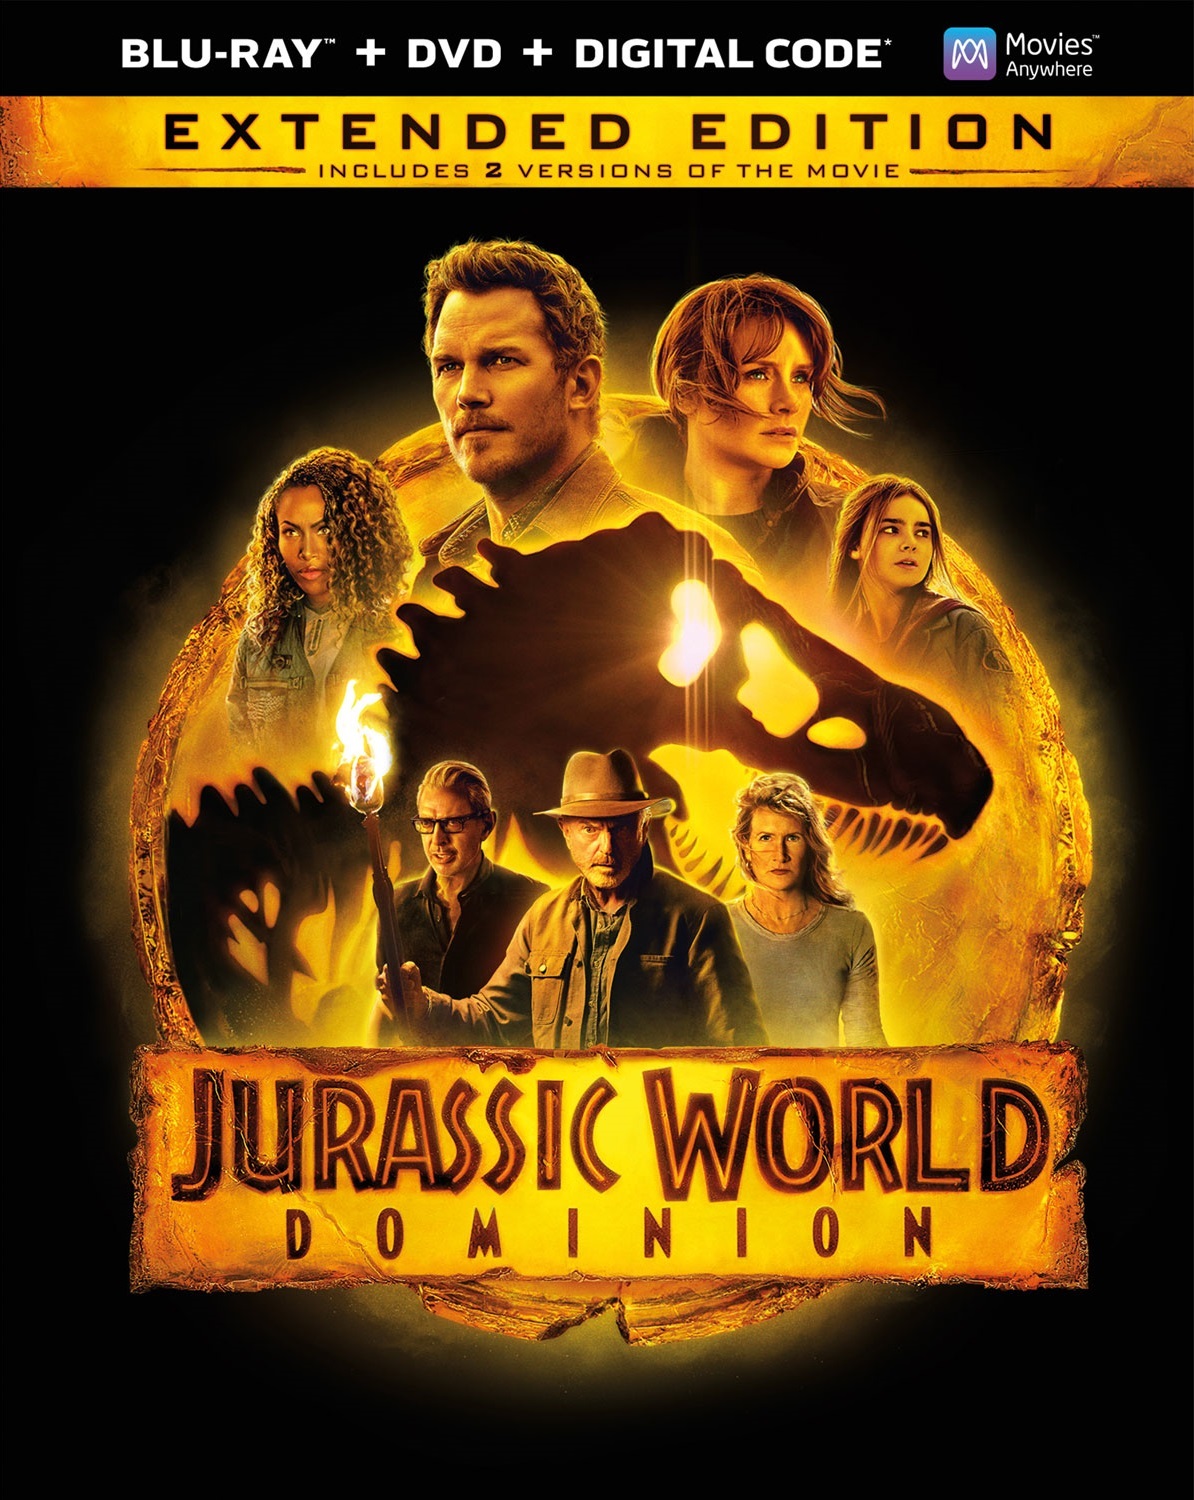 2022 - Jurassic World Dominion (2022) [Theatrical and Extended Edition] Jurassic World: Dominio (2022) [Versión de Teatro y Extendida] [DTS-HD HRA 7.1 + SUP] [Blu Ray] 310940_front